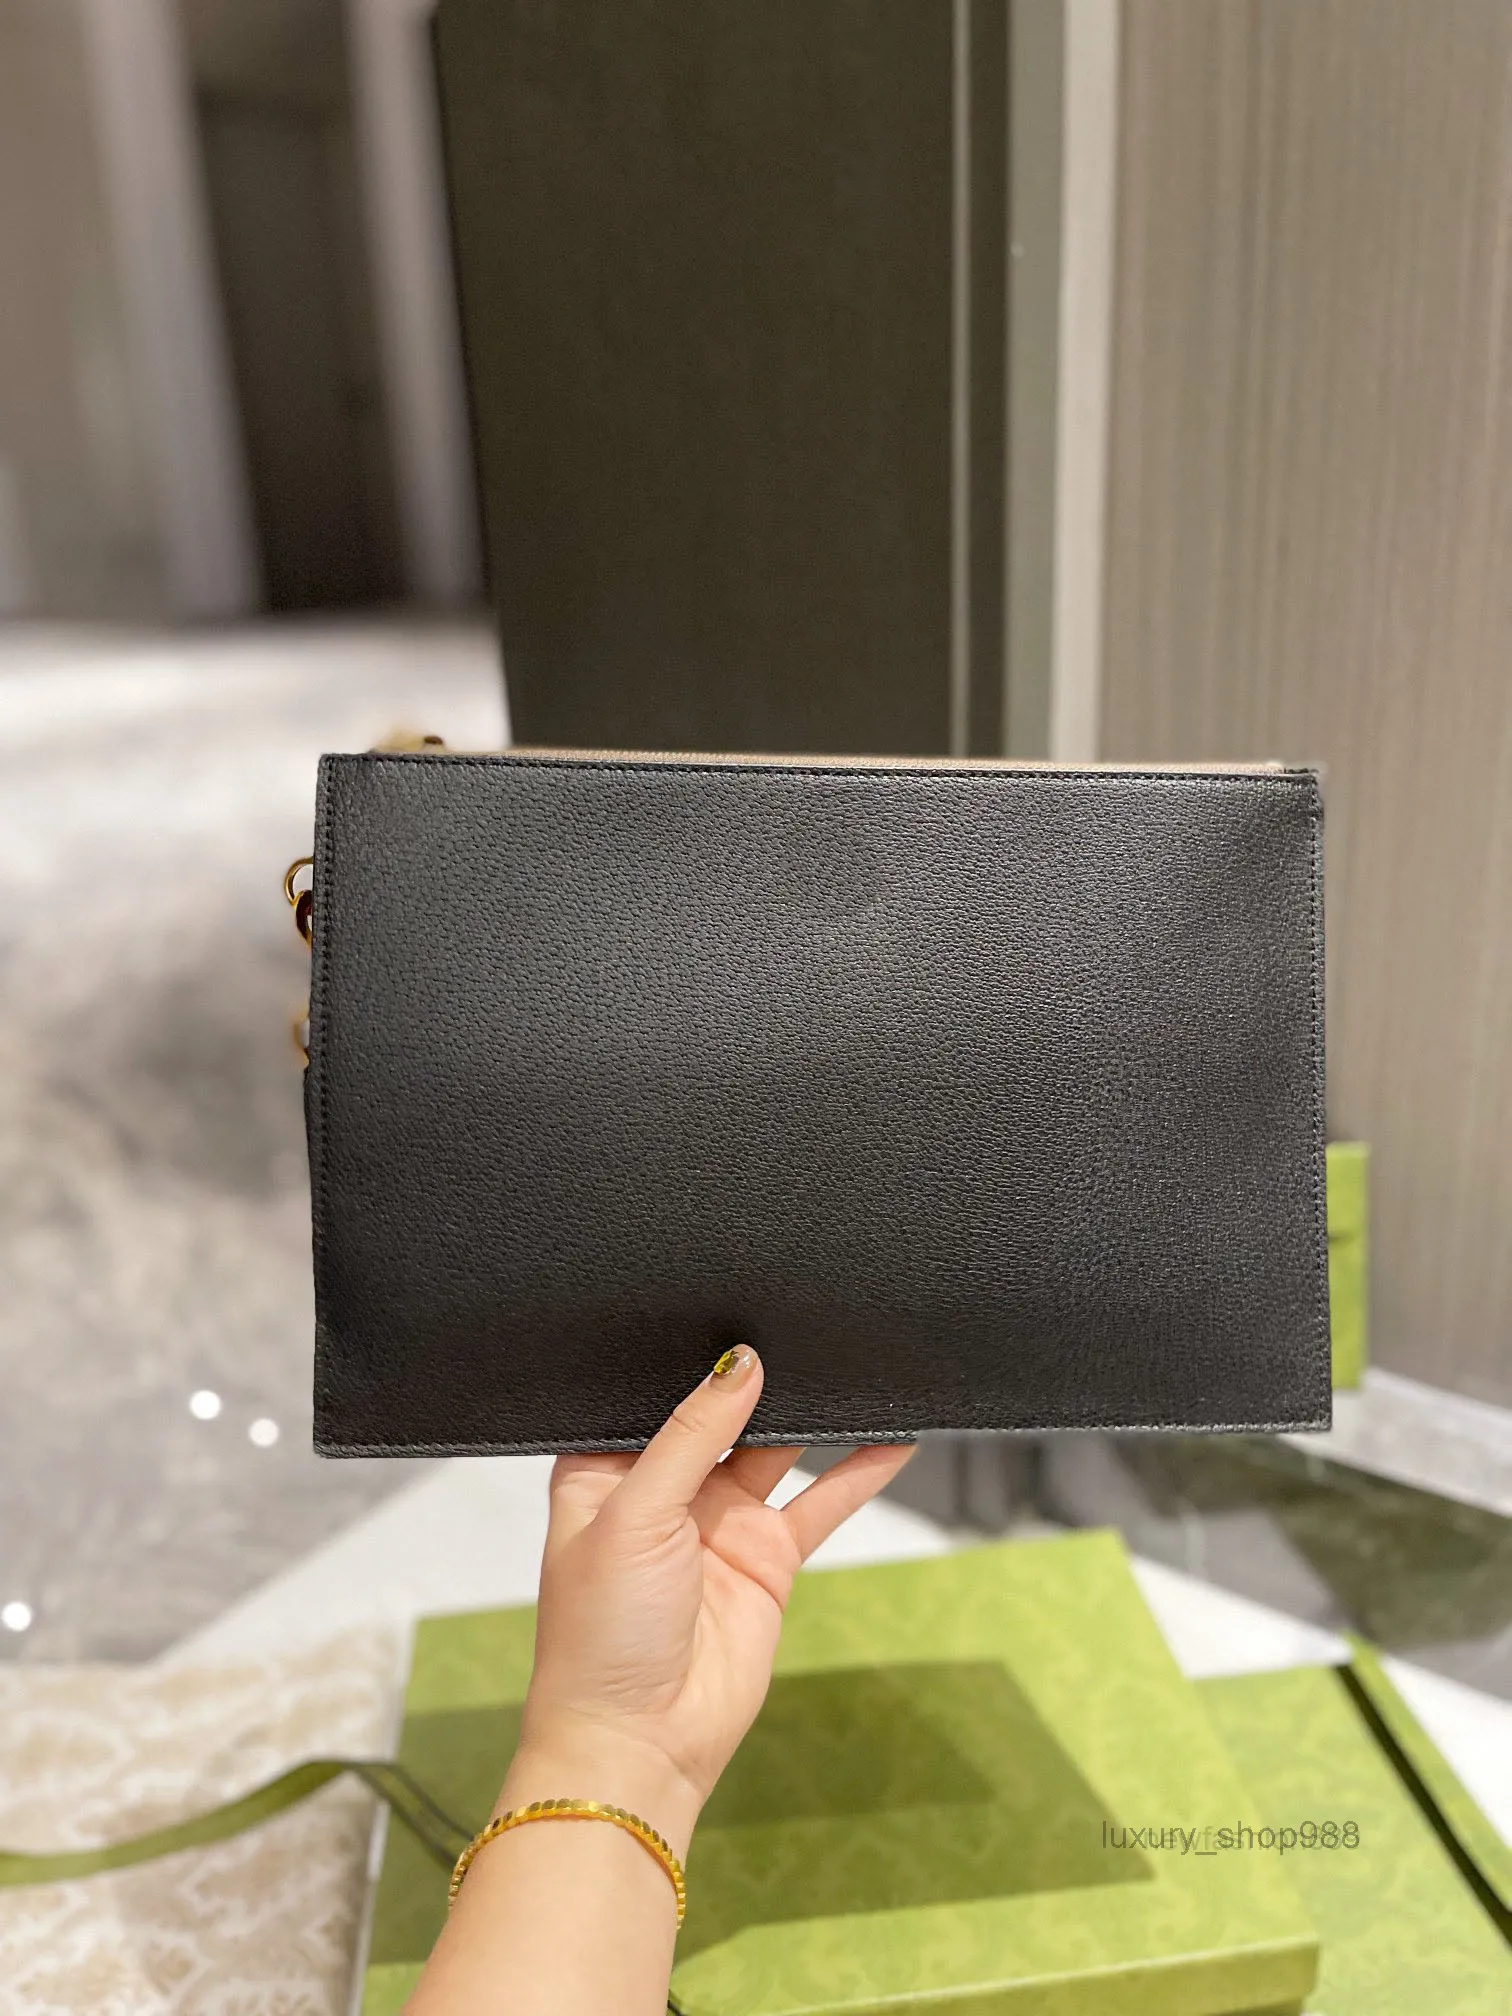 Designer Small Black Clutch Bag For Women And Men 20CM Wristlet Phone Bag  With Key Pouch, Zipped Coin Purse, And Daily Handbag Wist Wallet From  Waist, $12.77 | DHgate.Com